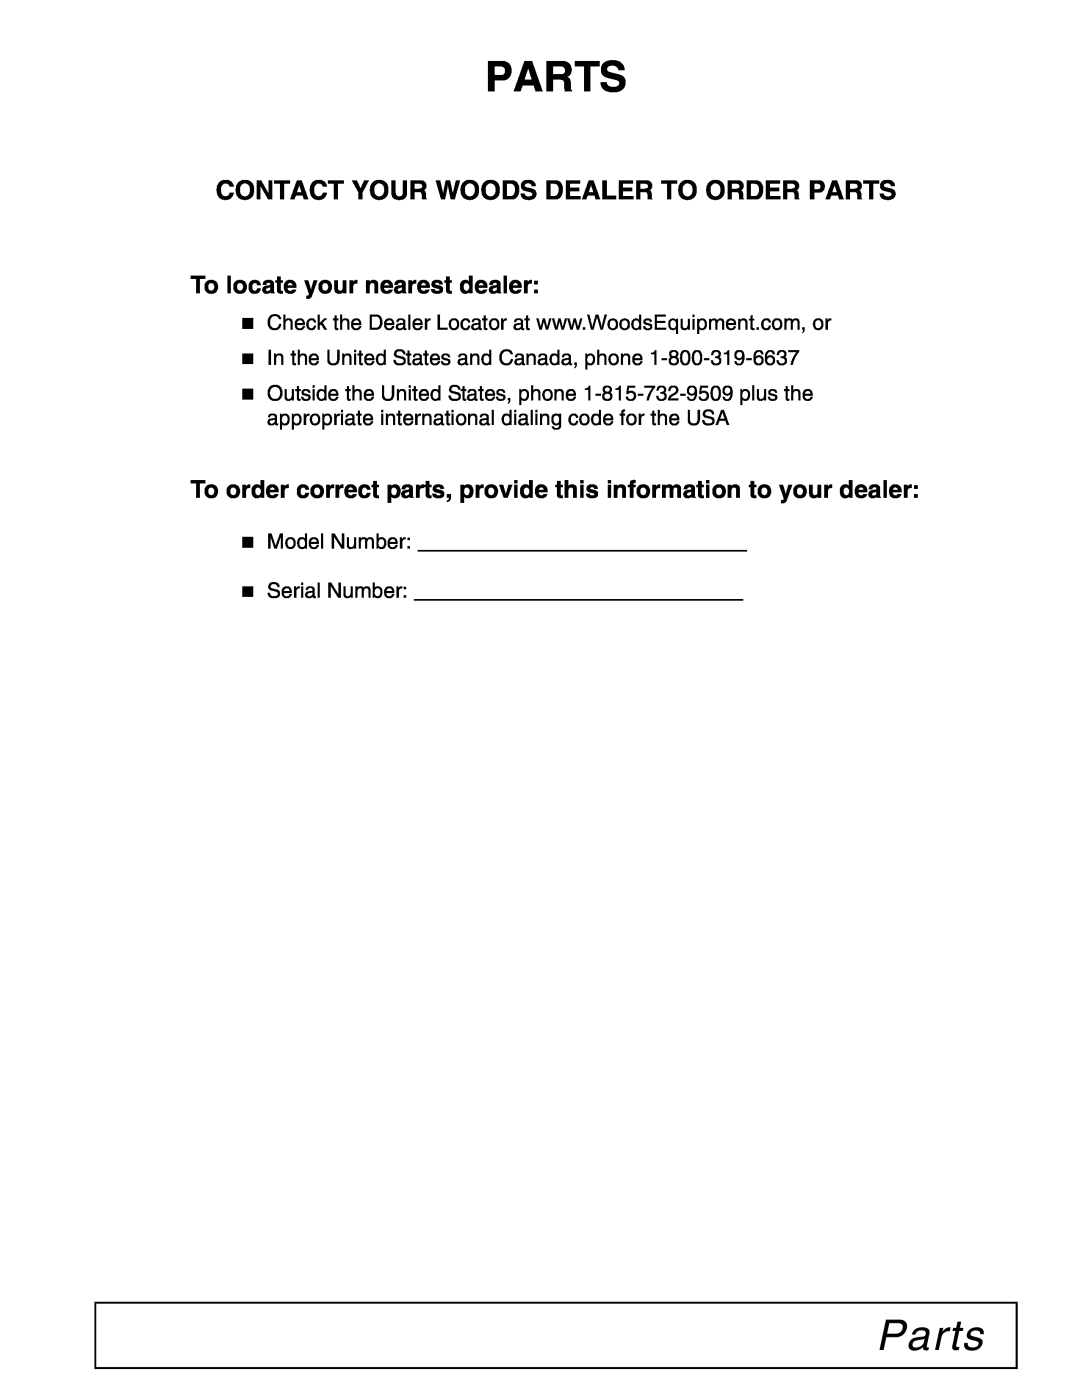 Woods Equipment RDC54, RD60, RD72 manual To locate your nearest dealer, Contact Your Woods Dealer To Order Parts 